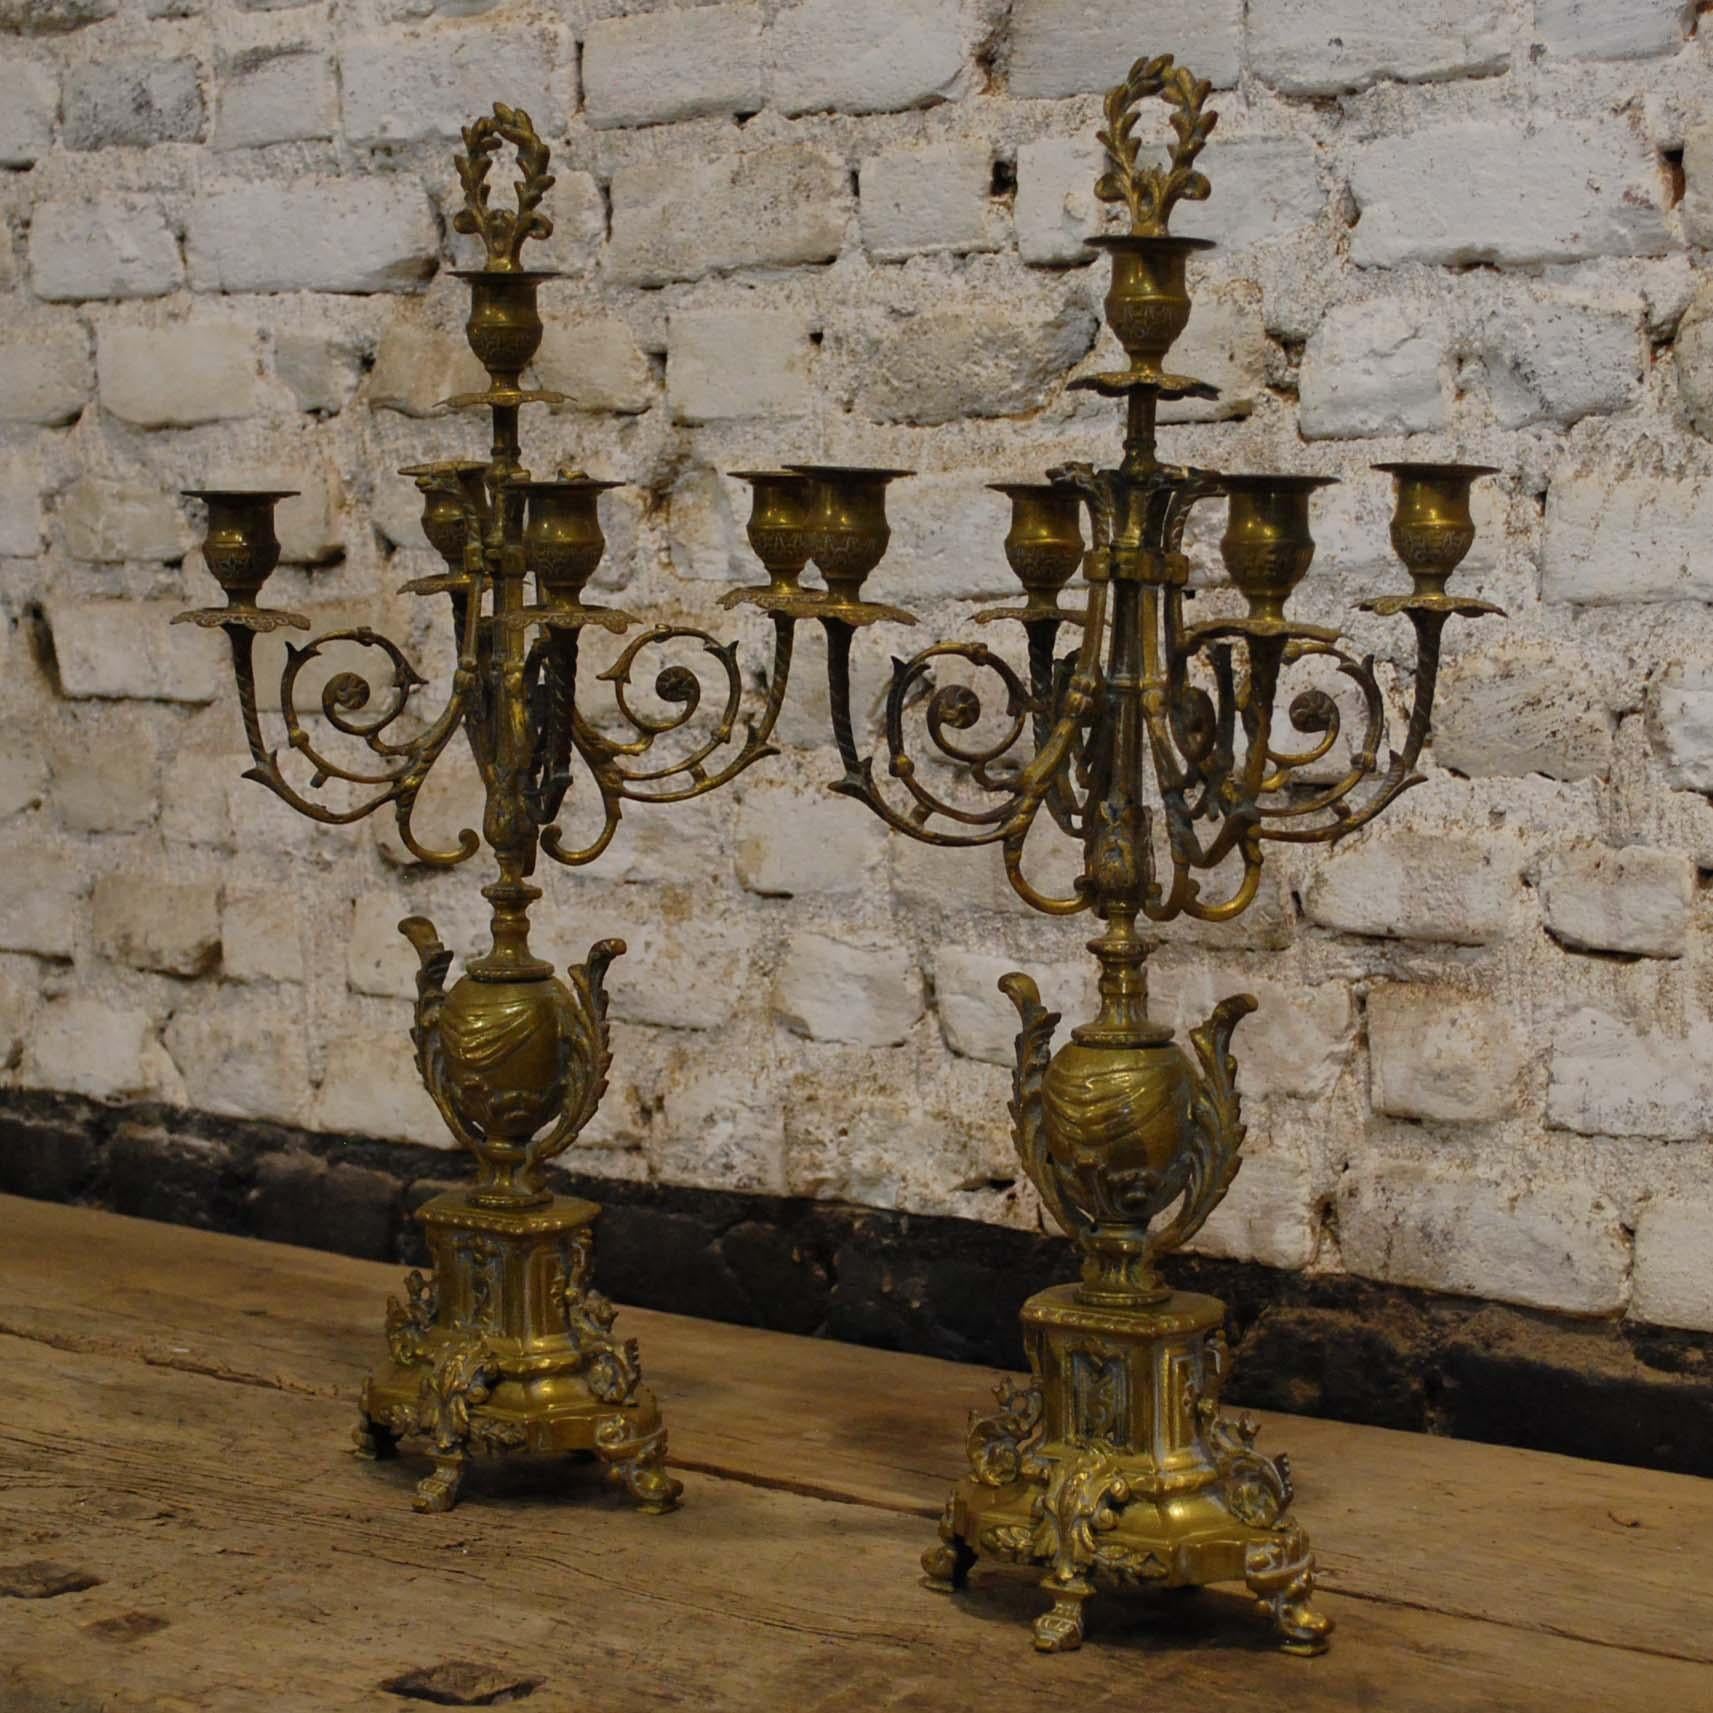 A beautiful fine quality pair of French brass candelabras in Louis XVI style. The five-light candelabra are made from casted ornaments put together on a central spine. The candelabras are richly decorated with acanthus borders and scrolls, foliate